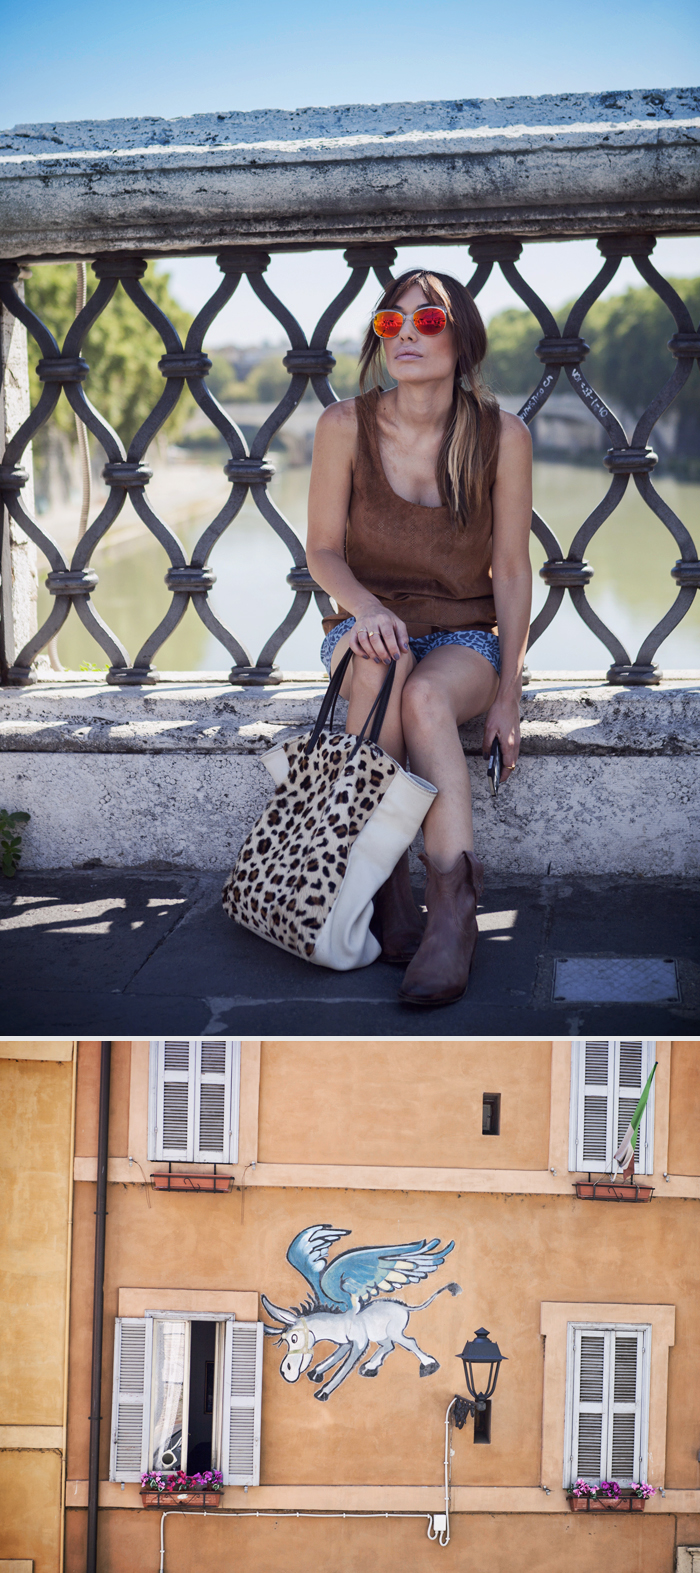 street style barbara crespo holidays cruisse travels italy rome outfit